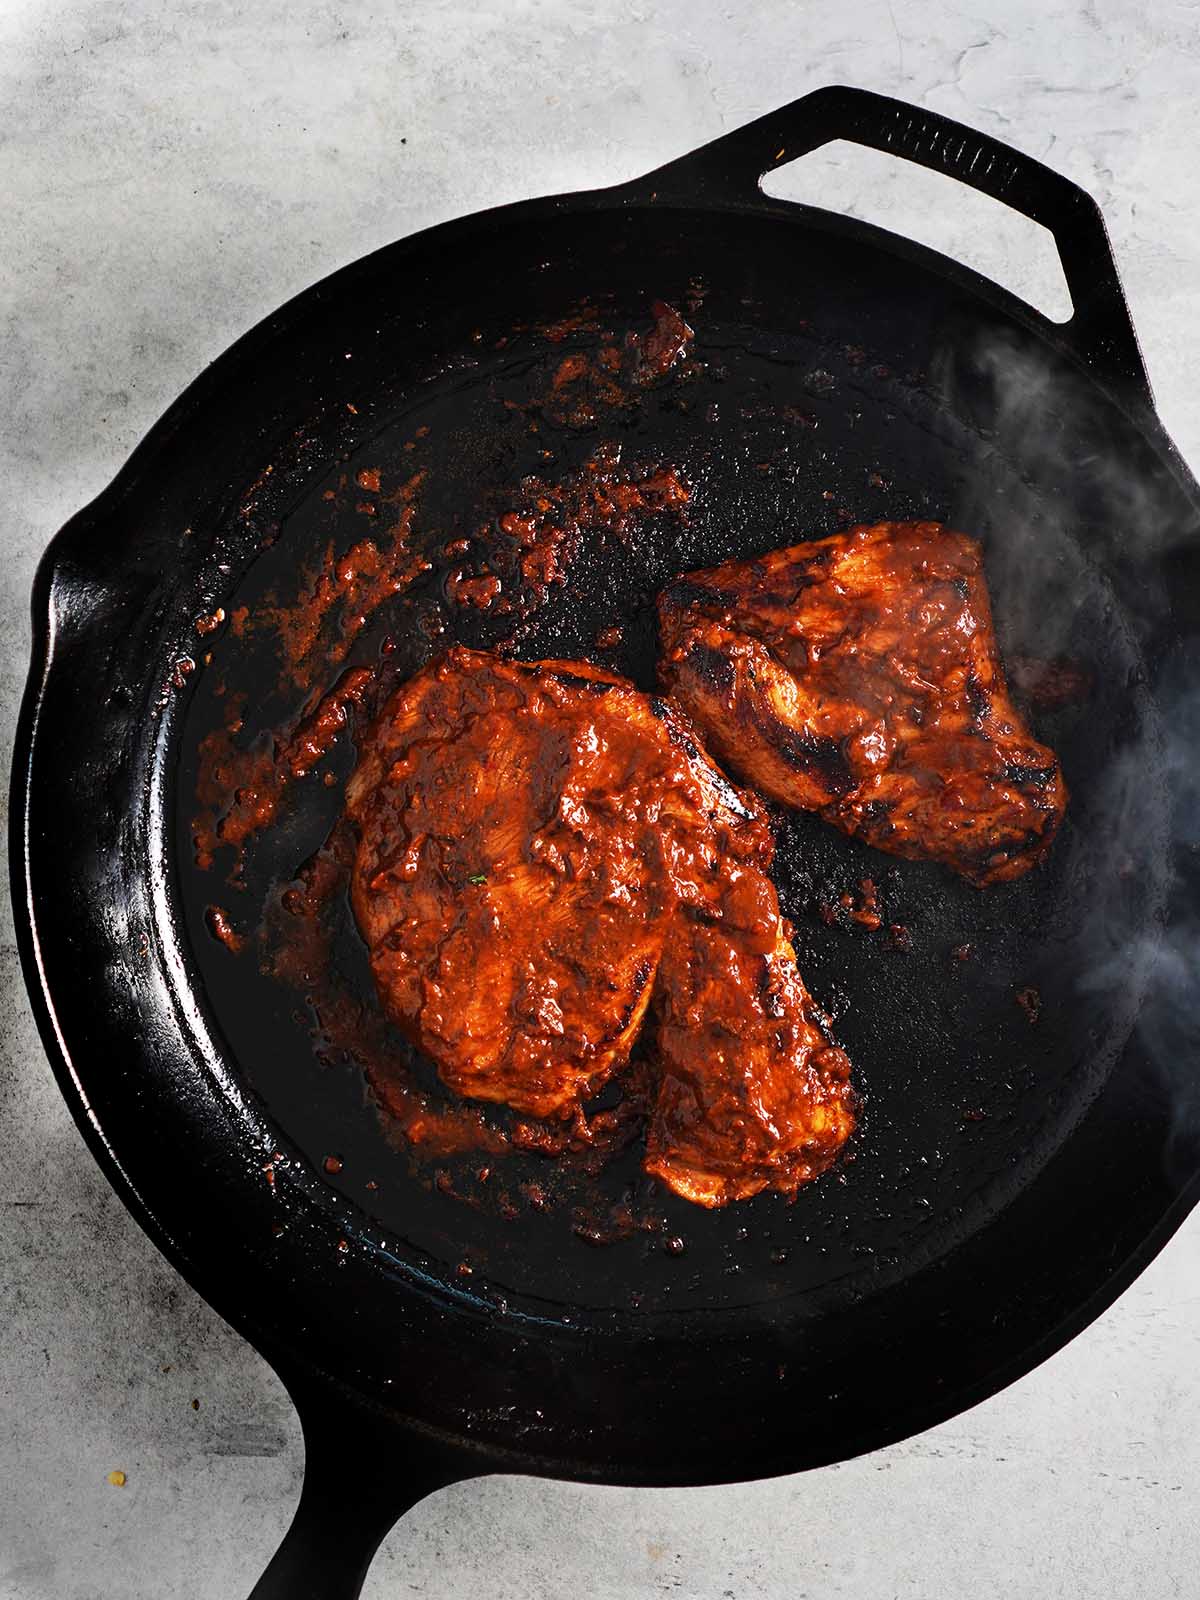 Pork fillets in adobo are being cooked in a cast iron skillet.